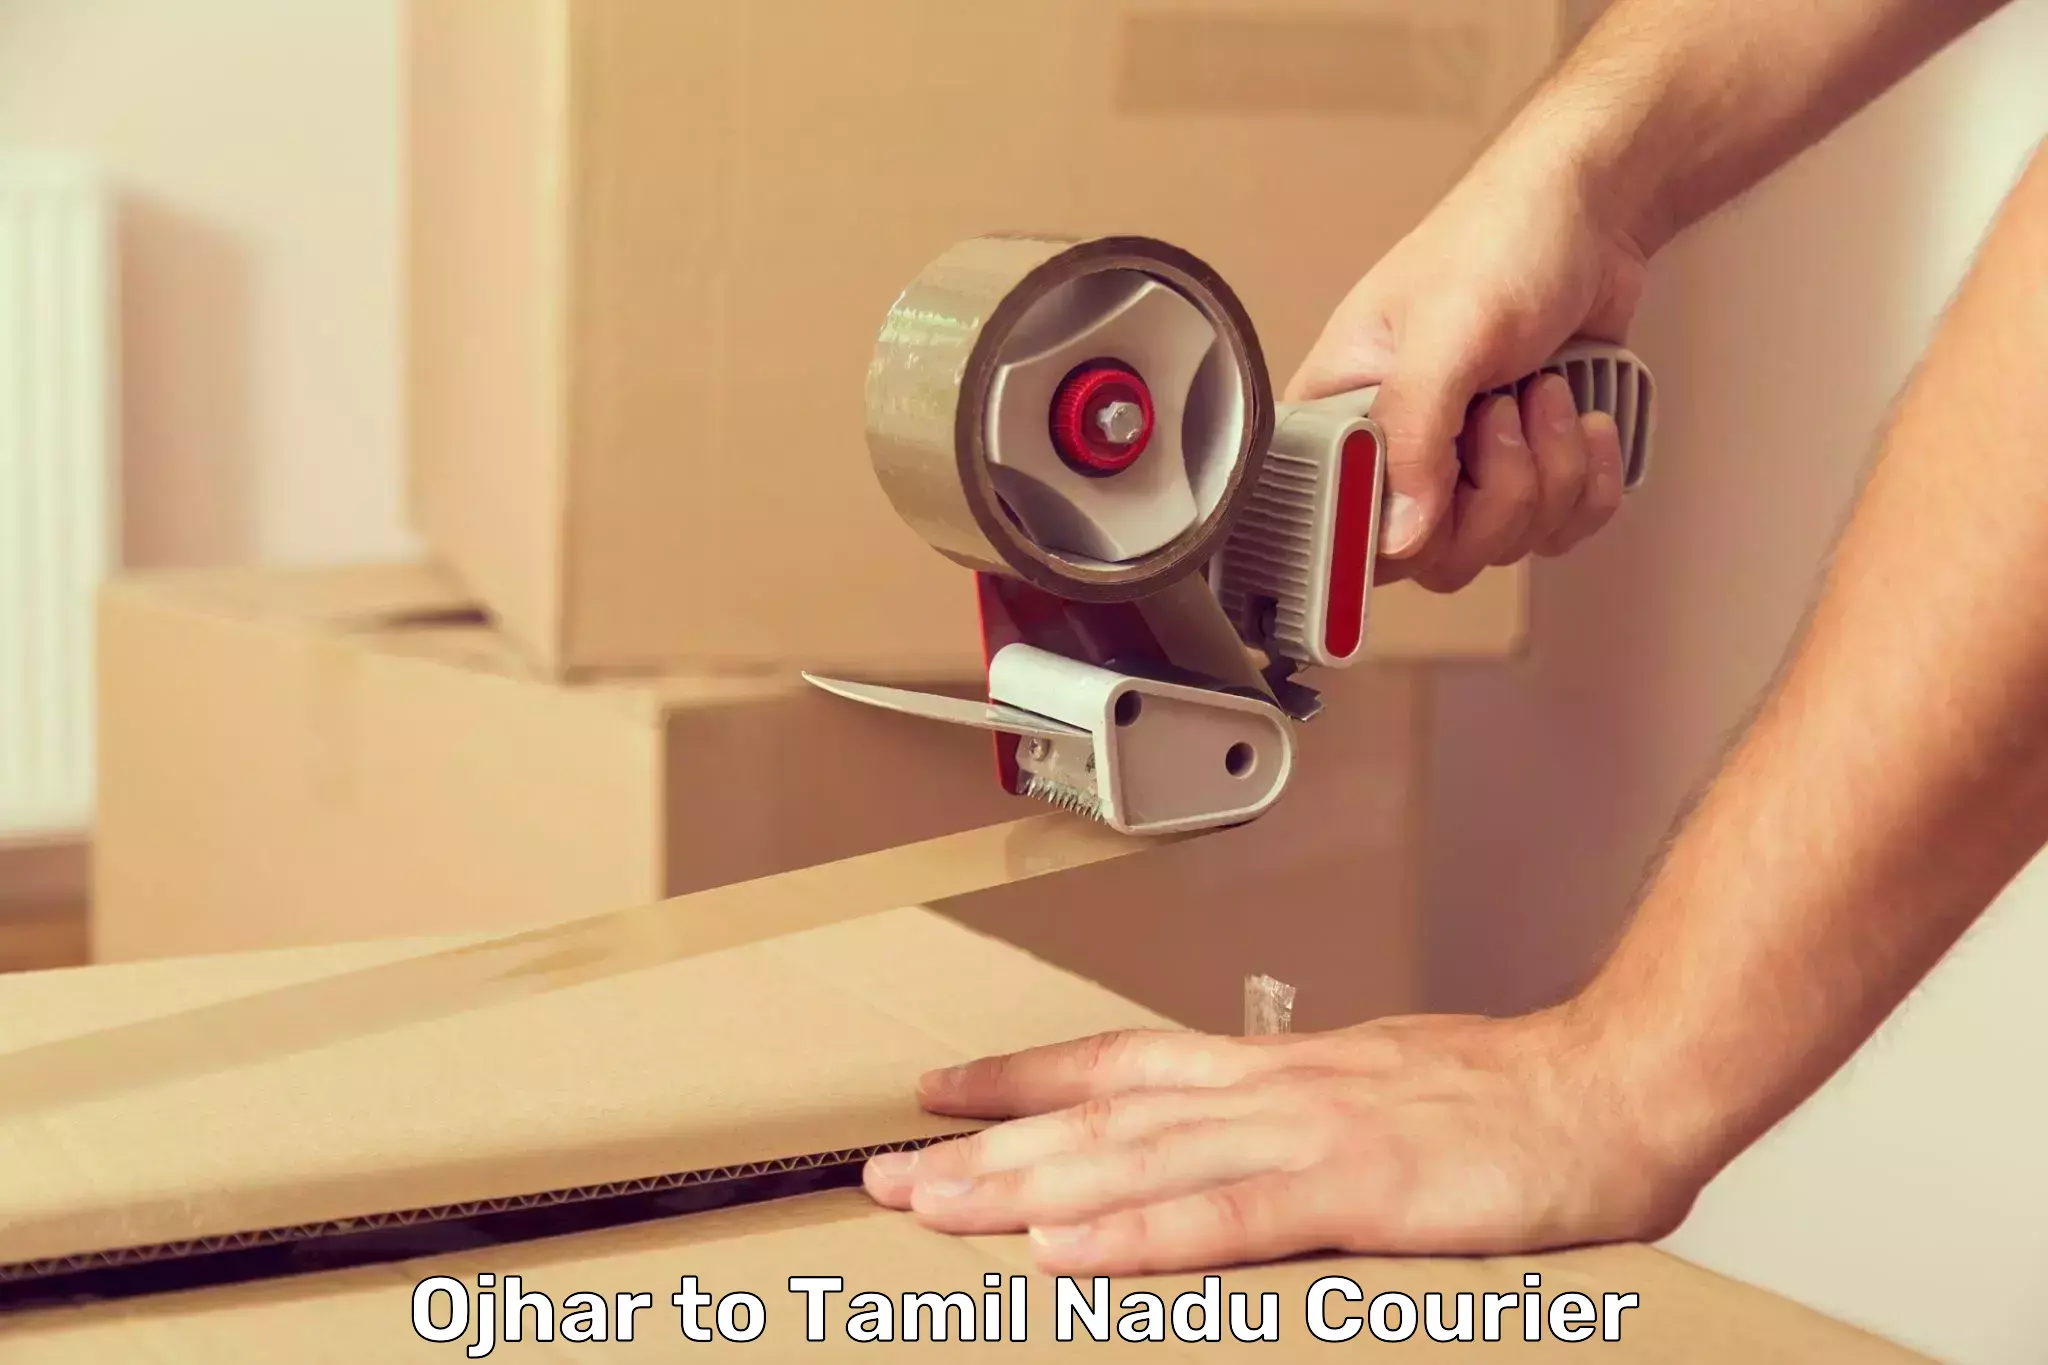 Express courier capabilities Ojhar to Tamil Nadu